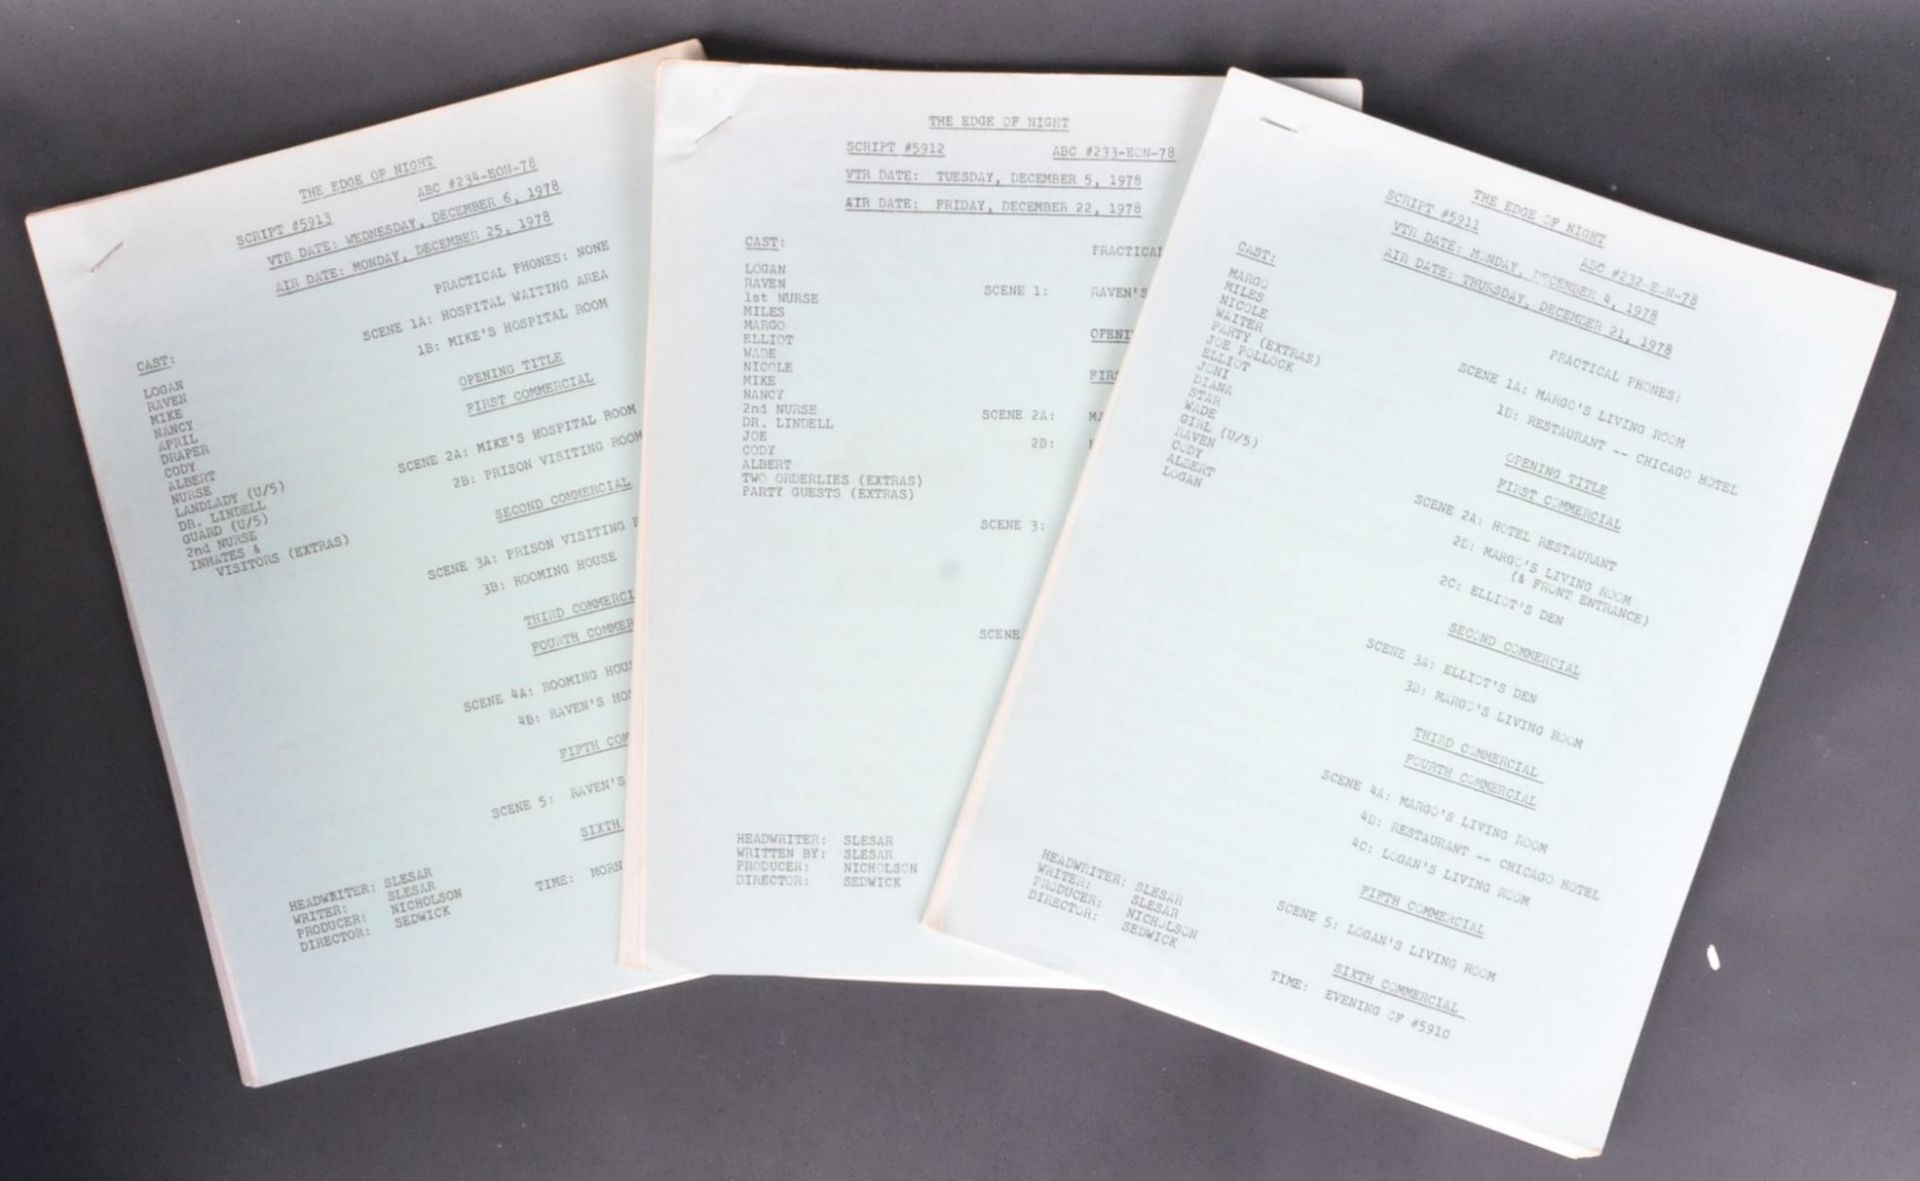 ESTATE OF DAVE PROWSE - THE EDGE OF NIGHT (US SOAP OPERA) SCRIPTS